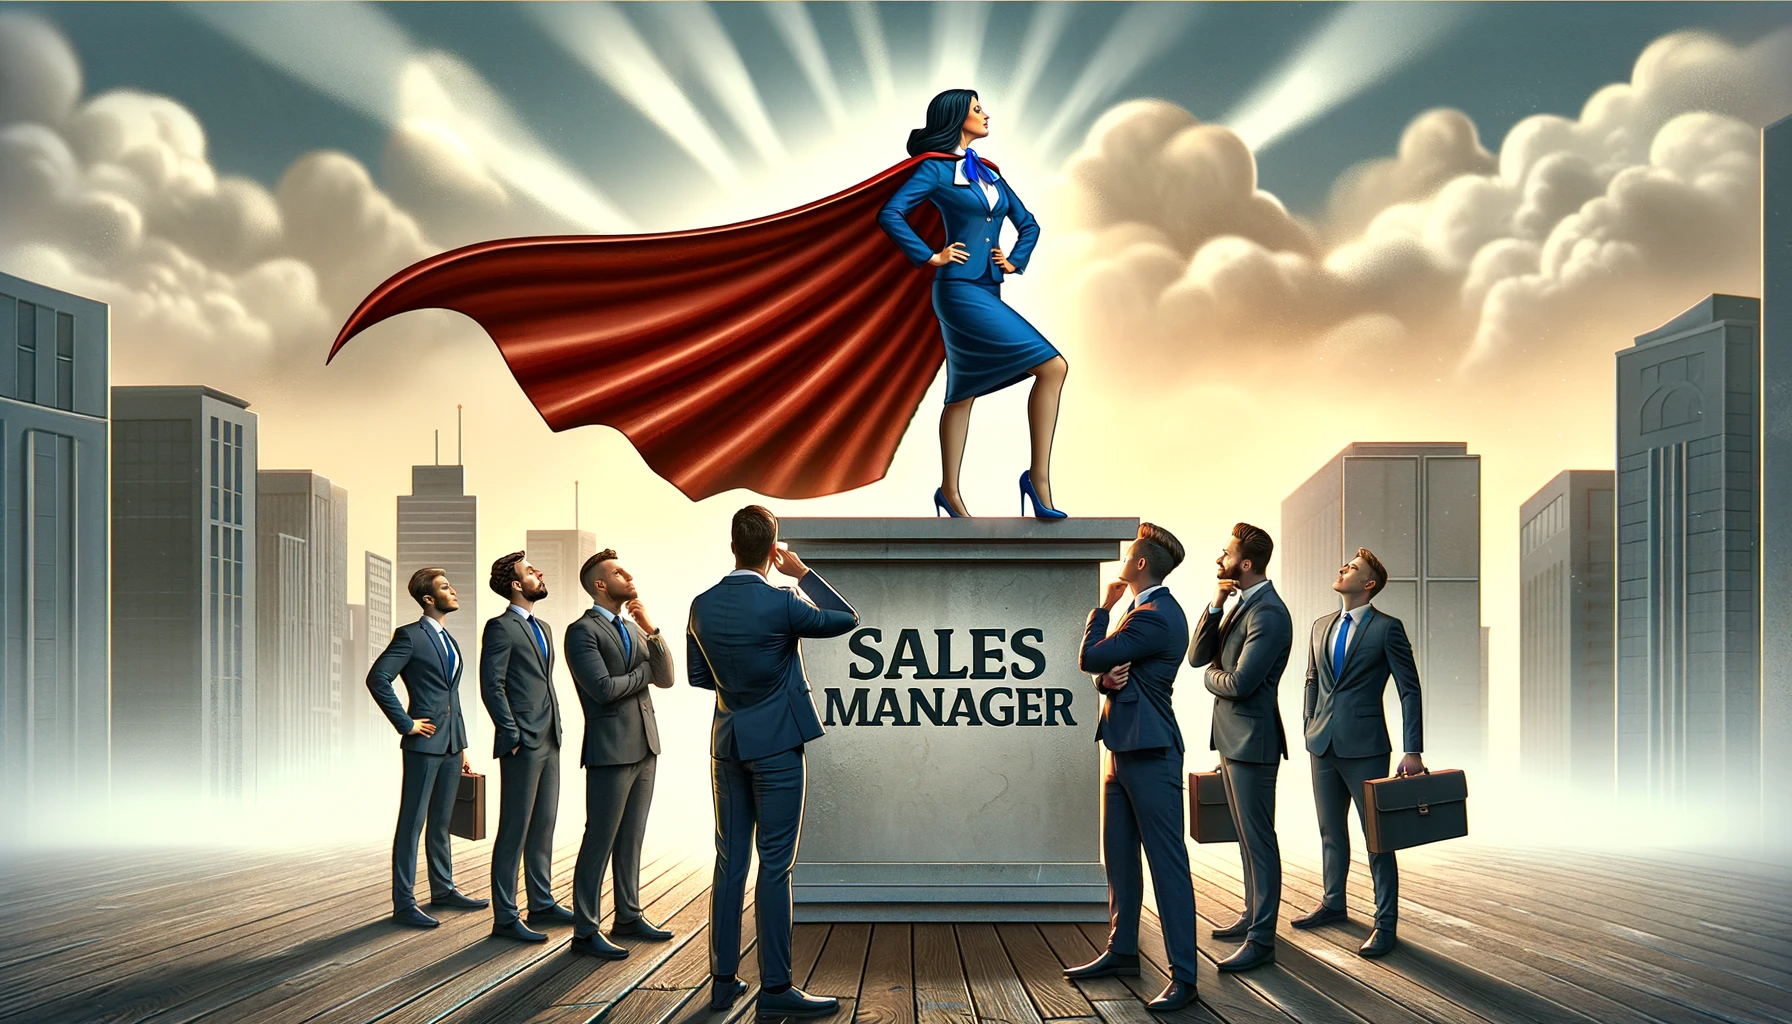 Sales Managers - Stop Playing Hero. Help your team solve problems without you. Try these 2 questions...